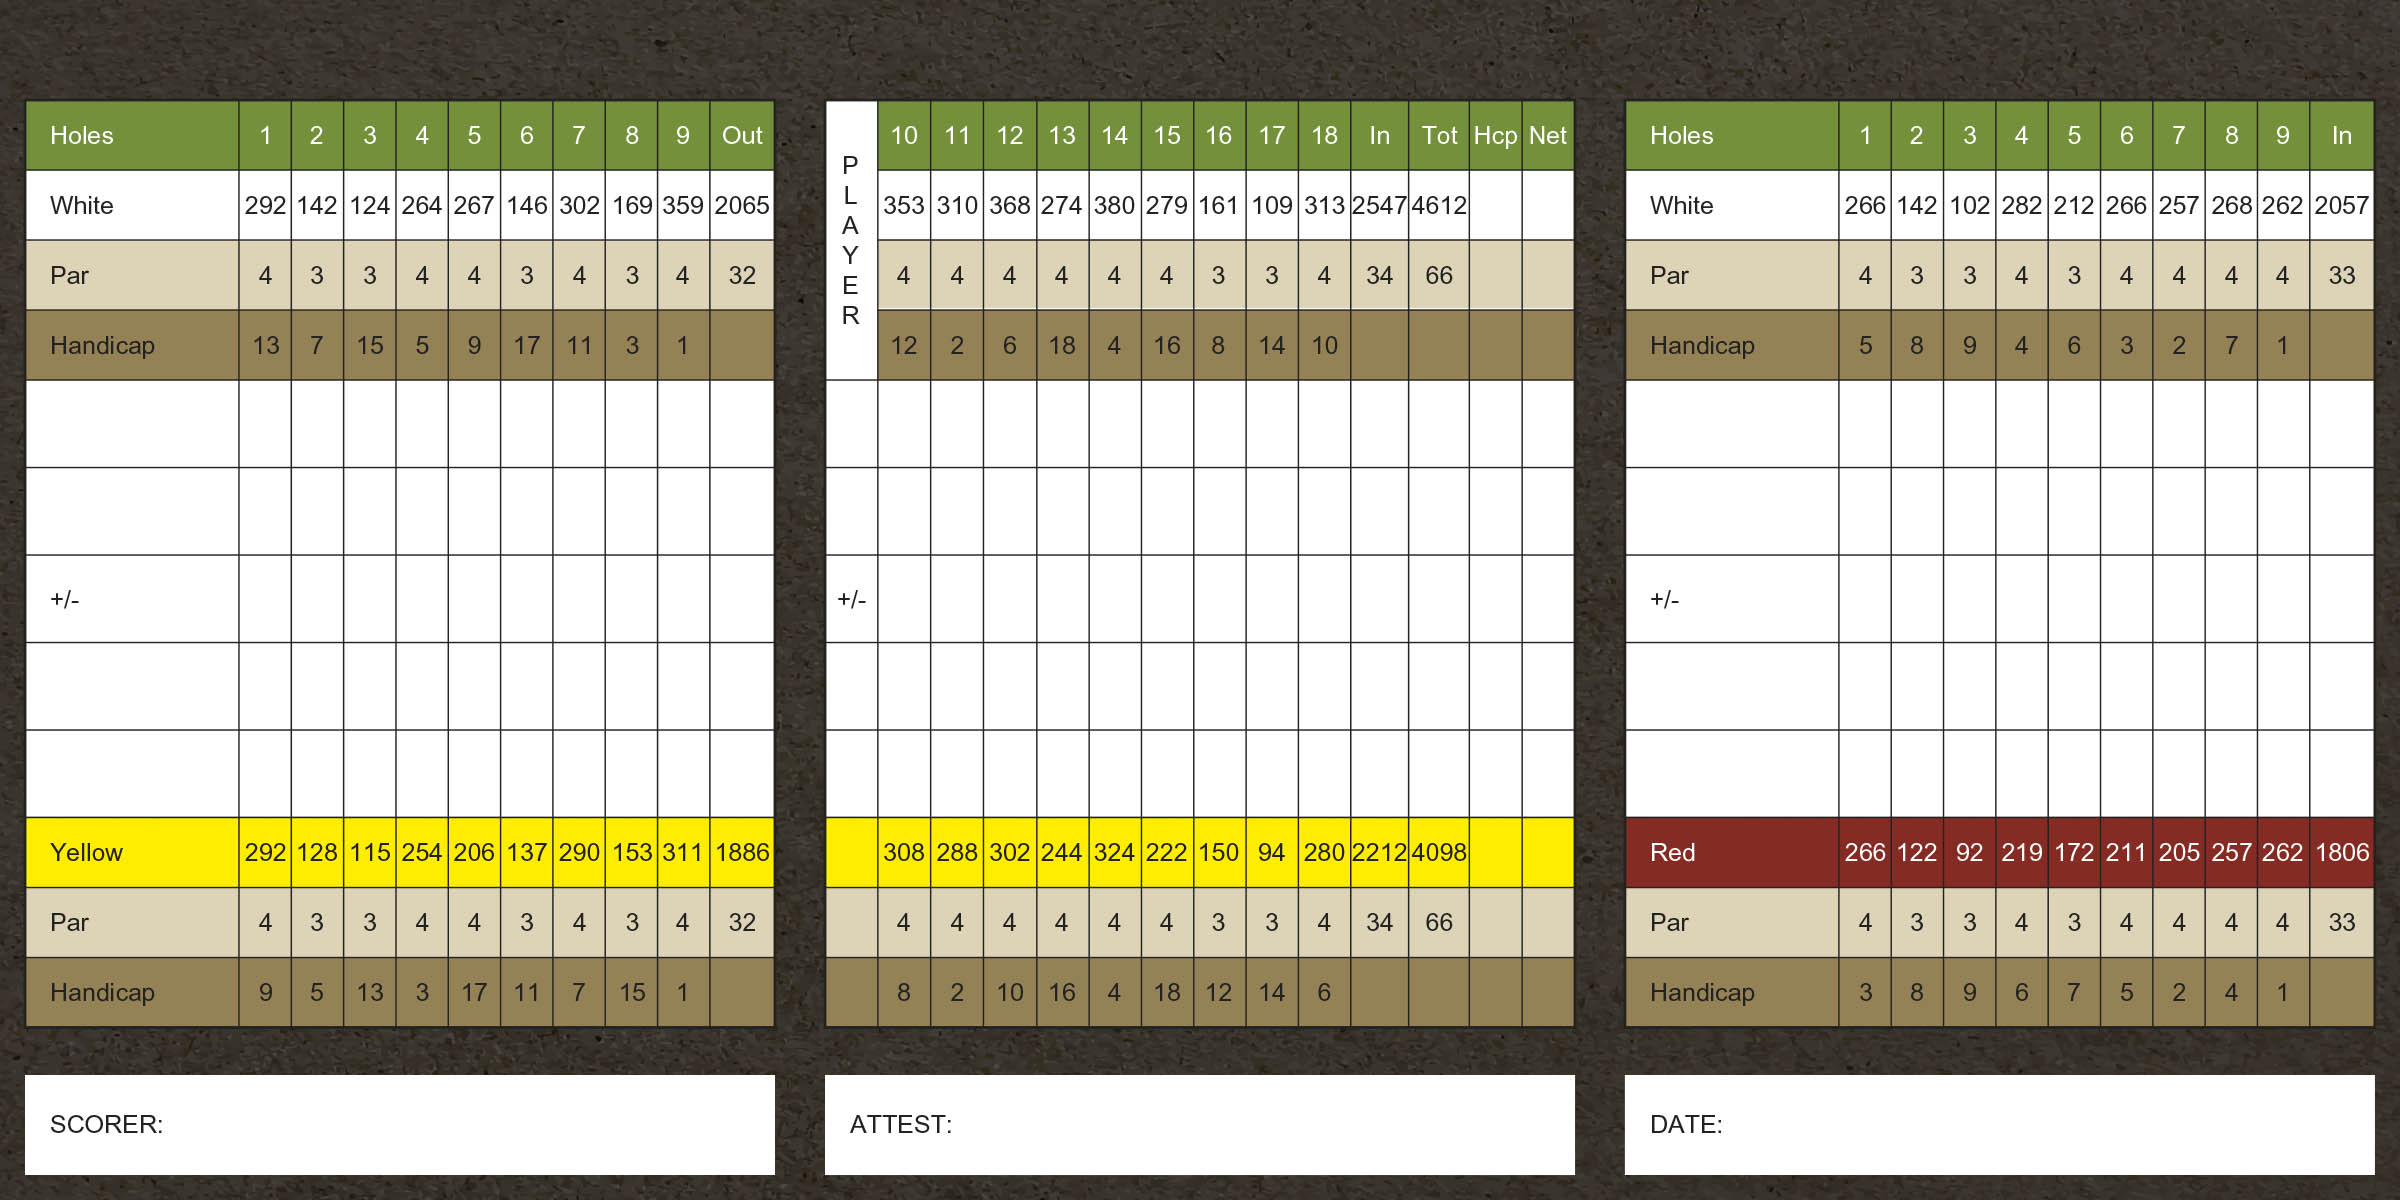 This is an image of Forest Golf Club & Inn's scorecard. For those who are visually impaired, please call 1-888-833-8787 for a representative to verbally guide you through the scorecard details.